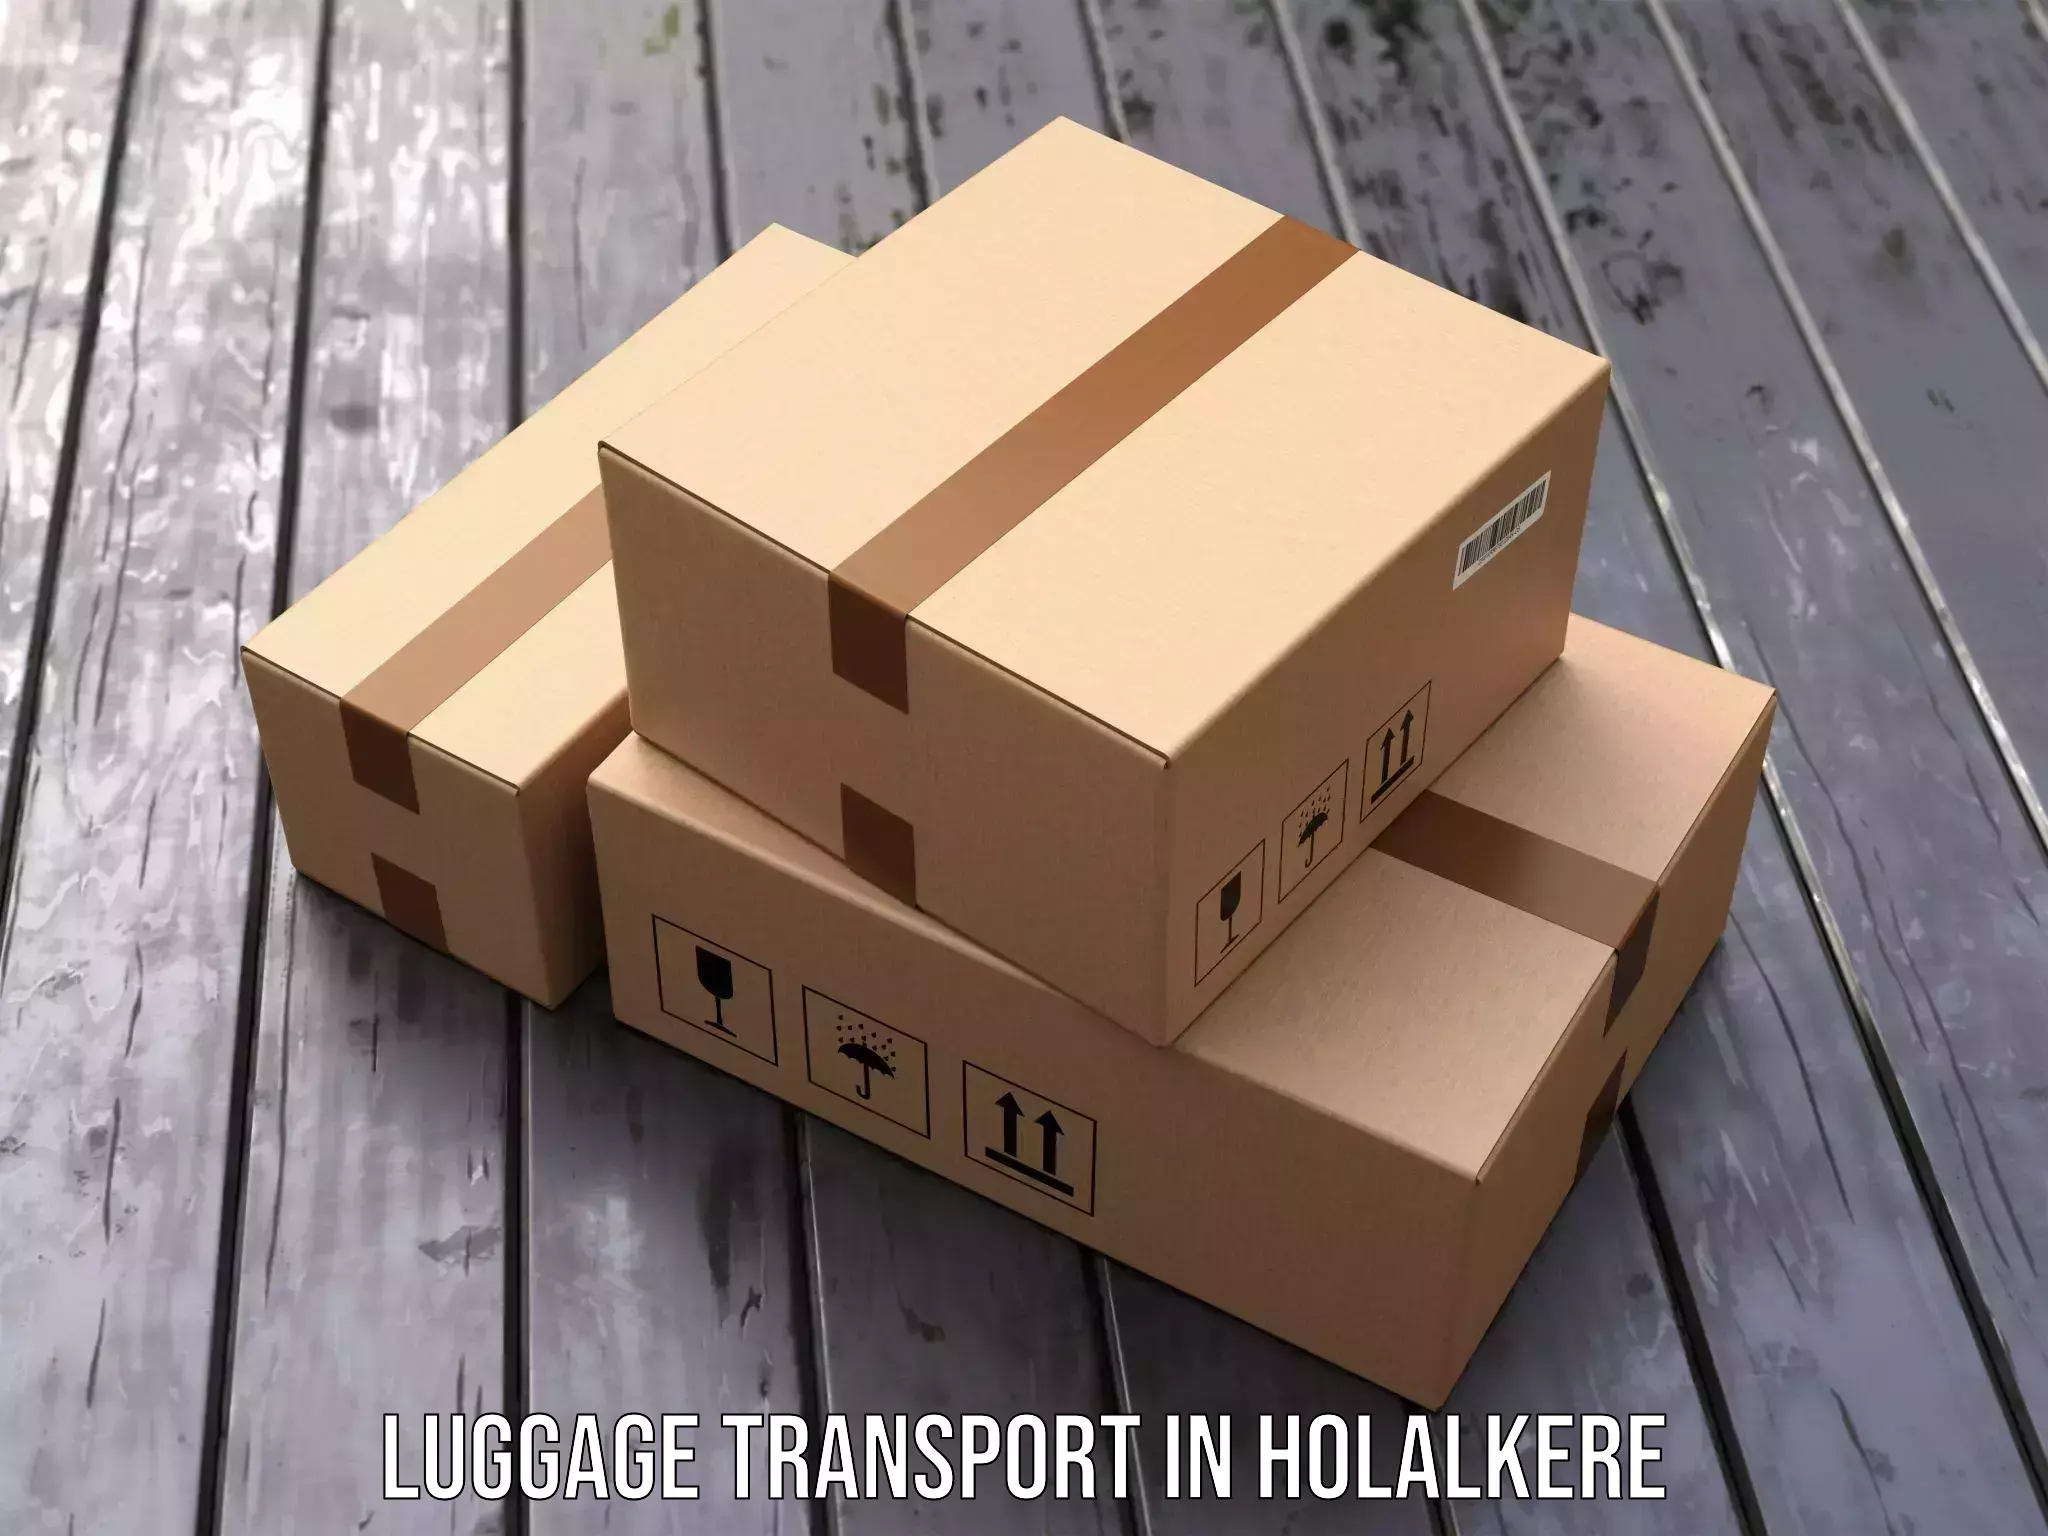 Luggage transport company in Holalkere